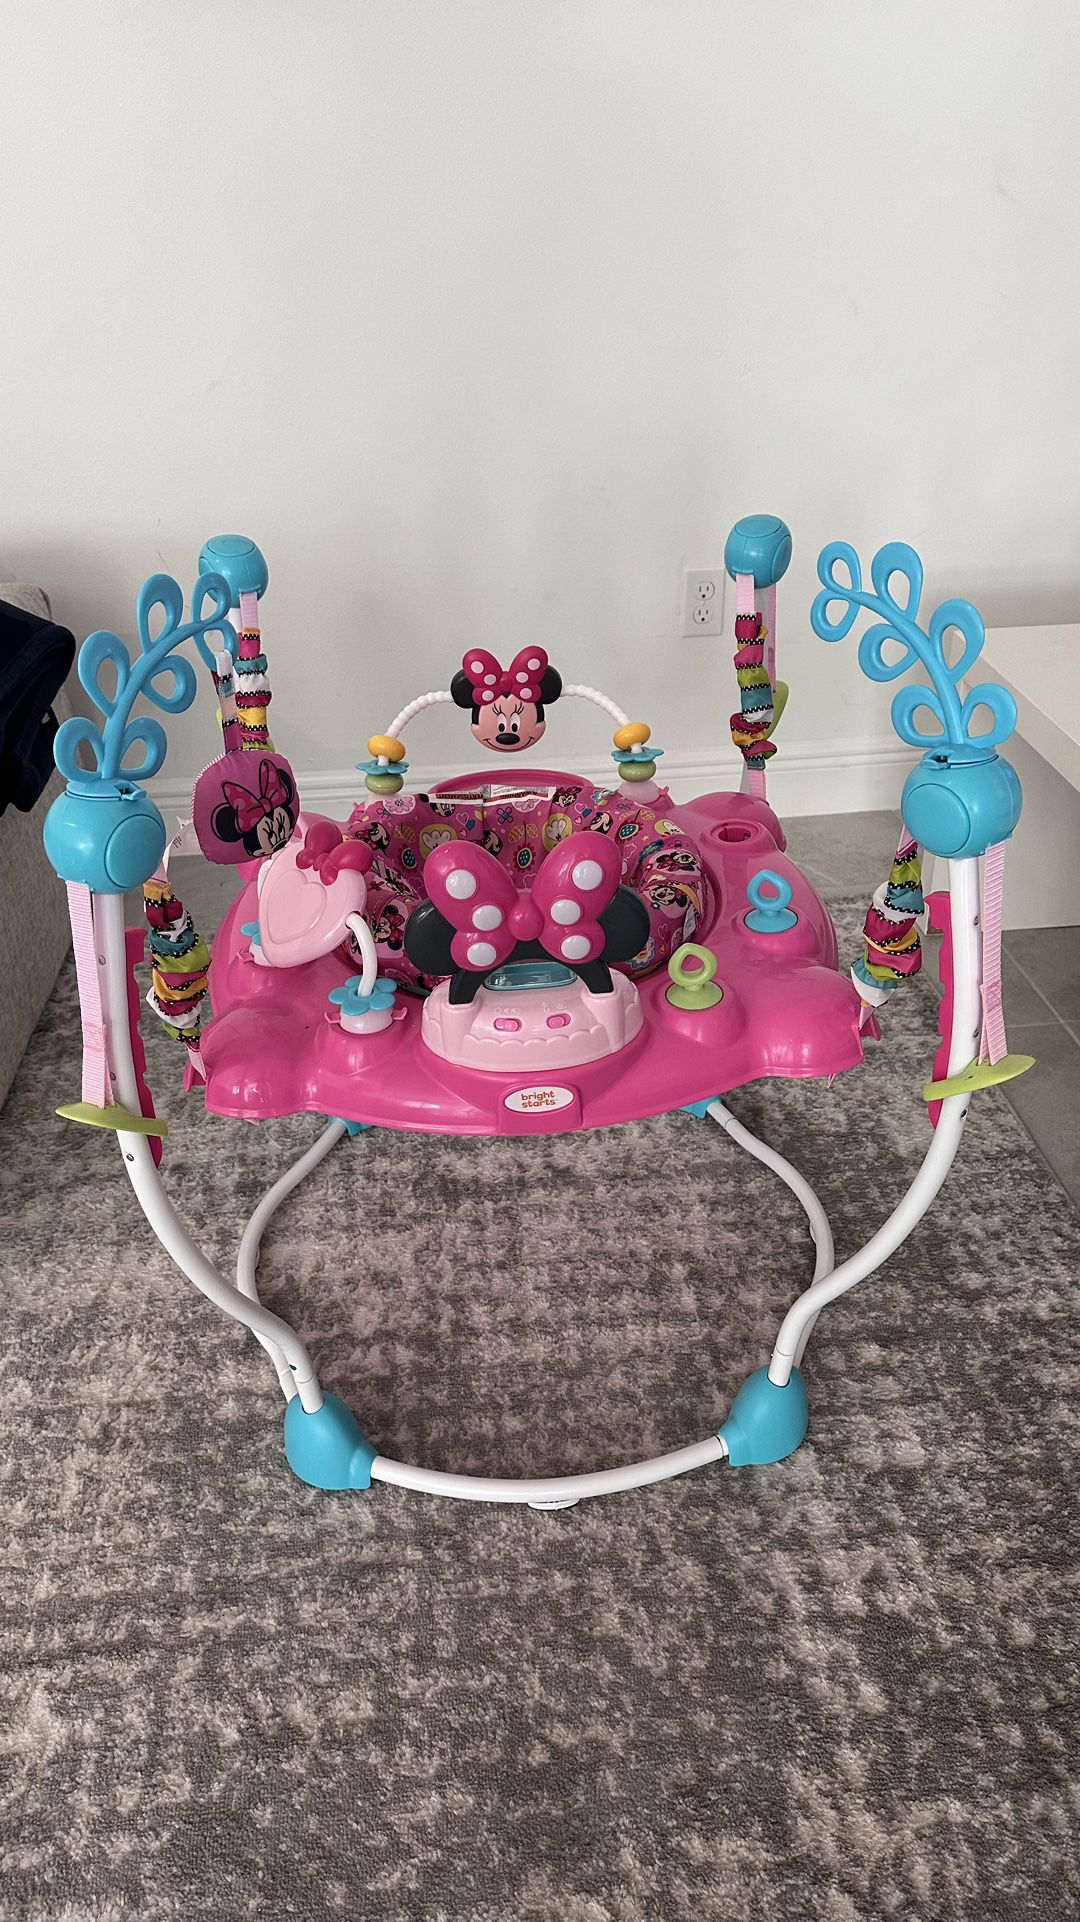  Disney Baby MINNIE MOUSE PeekABoo Baby Activity Center Jumper with 8 Toys, Lights & Sounds, 360-Degree Seat. 